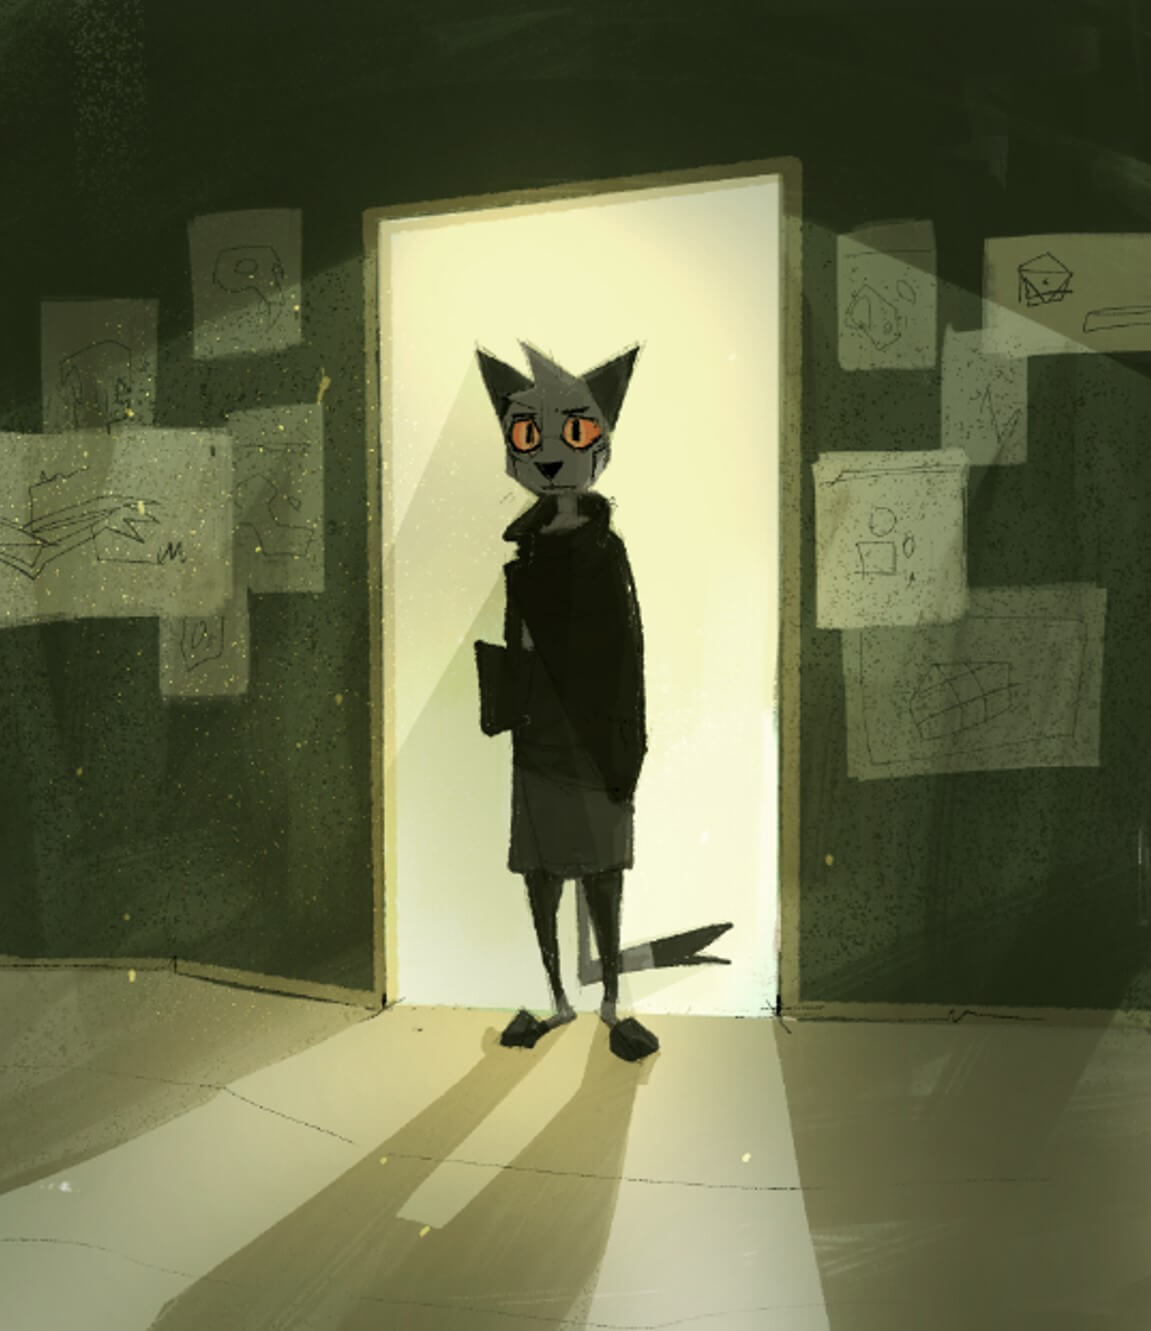 An illustration of a feline character, Stranger, standing in a doorway. In their arm they hold a tome of some sort. On the walls of the room are diagrams and papers marked with cryptic symbols. Their expression is something like an slowly brewing disappointment or let down over someone not visible in frame.